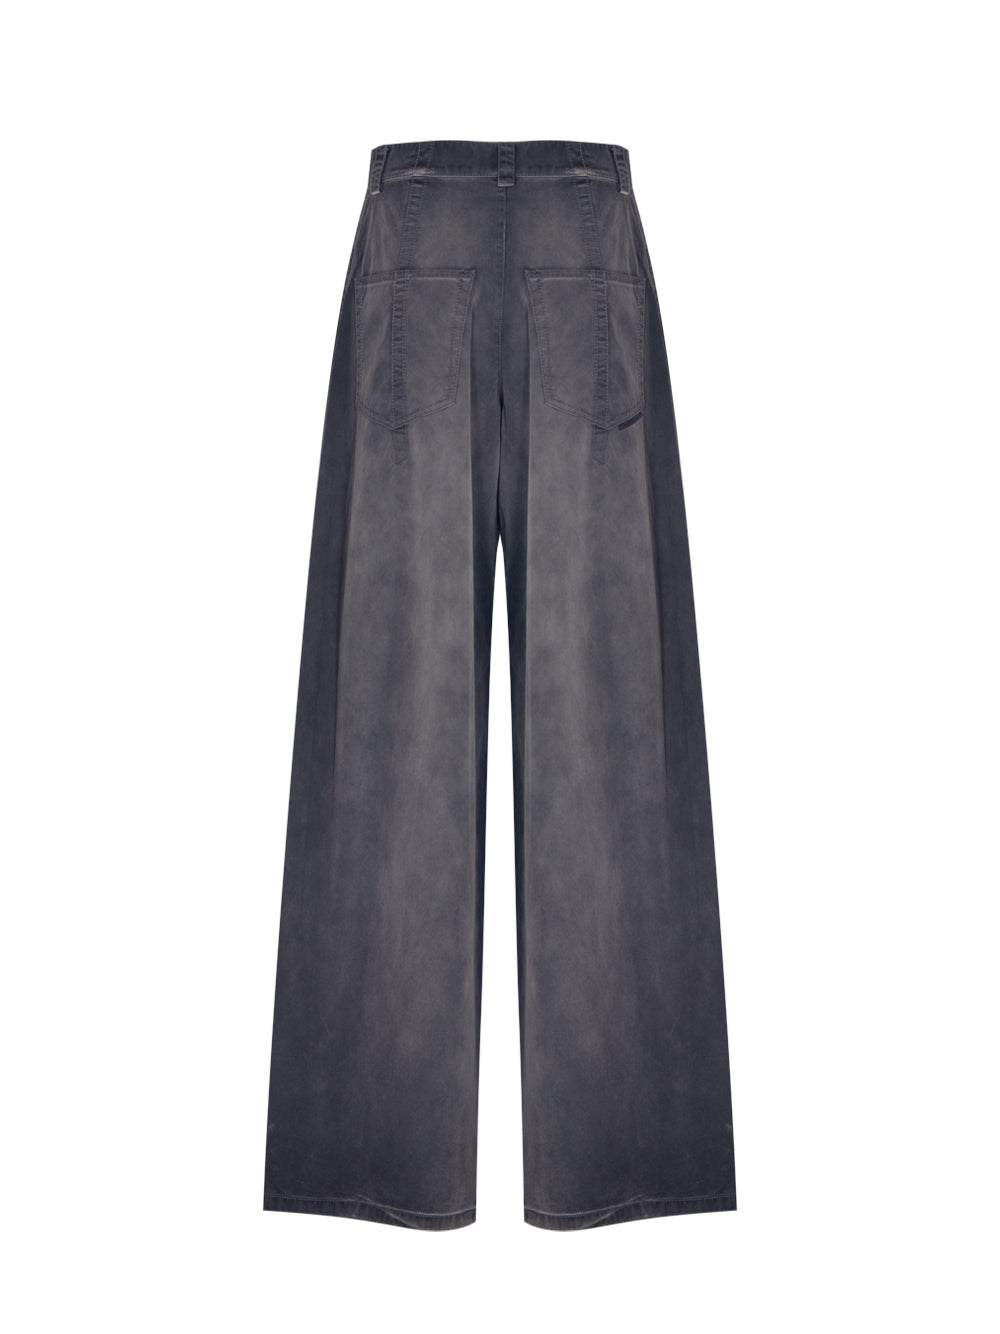 Five Pocket Pant Without Side Seam Washed Black Pearl